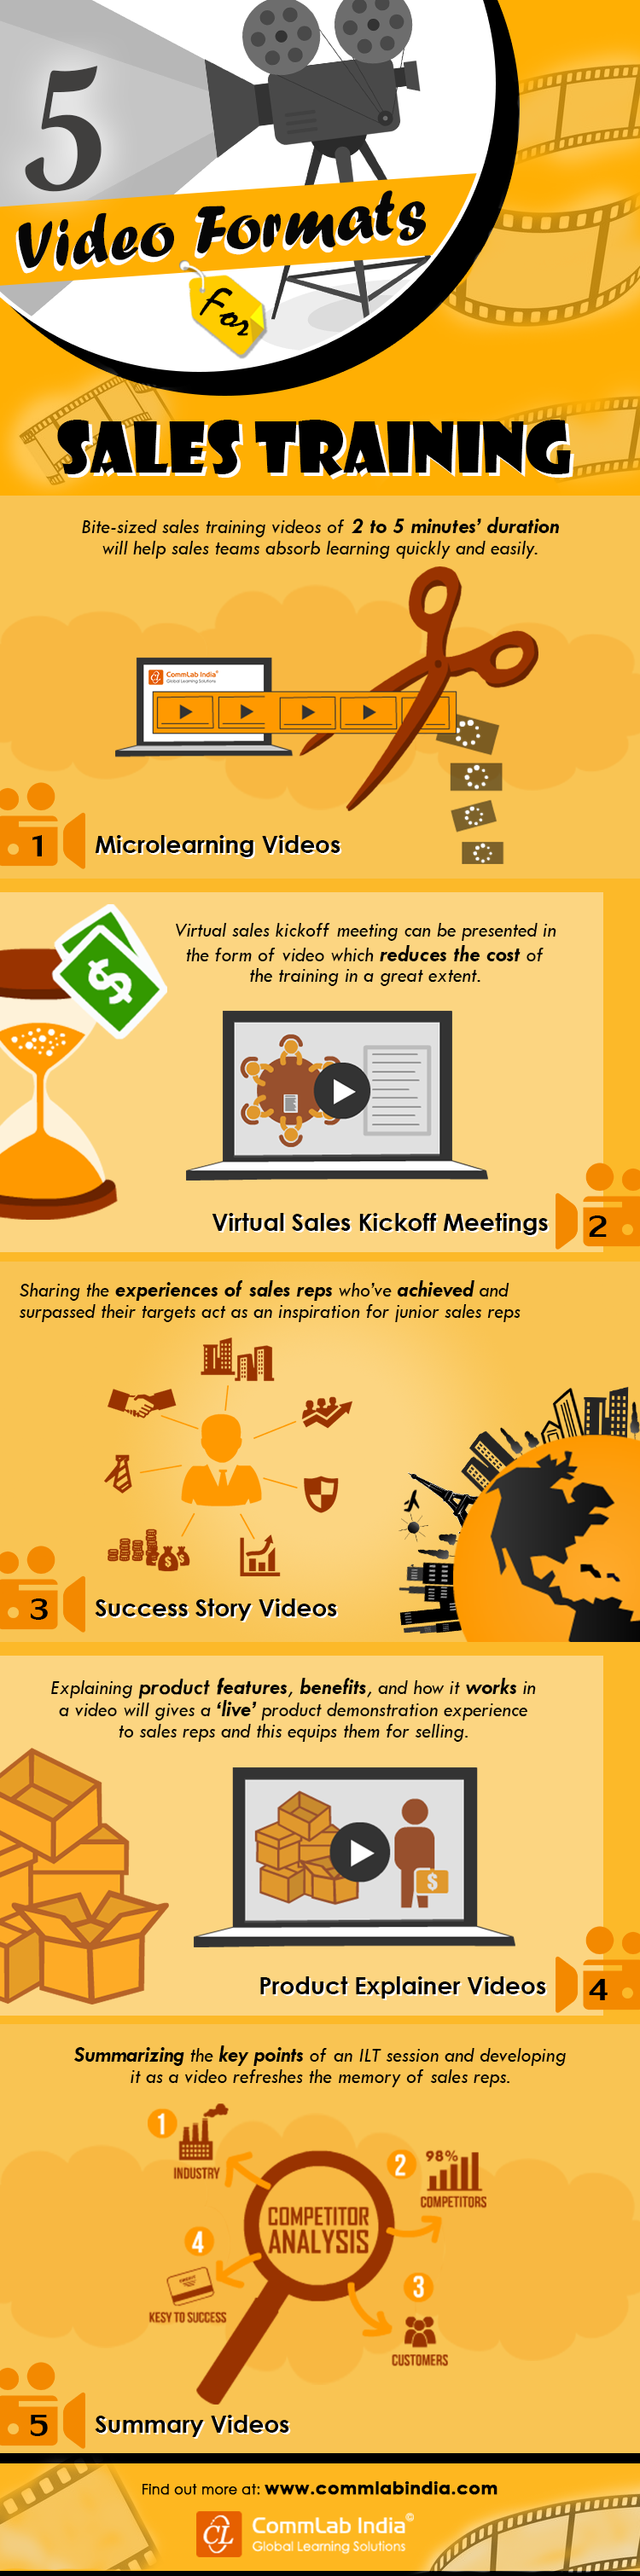 5 Video Formats for Effective Sales Training [Infographic]